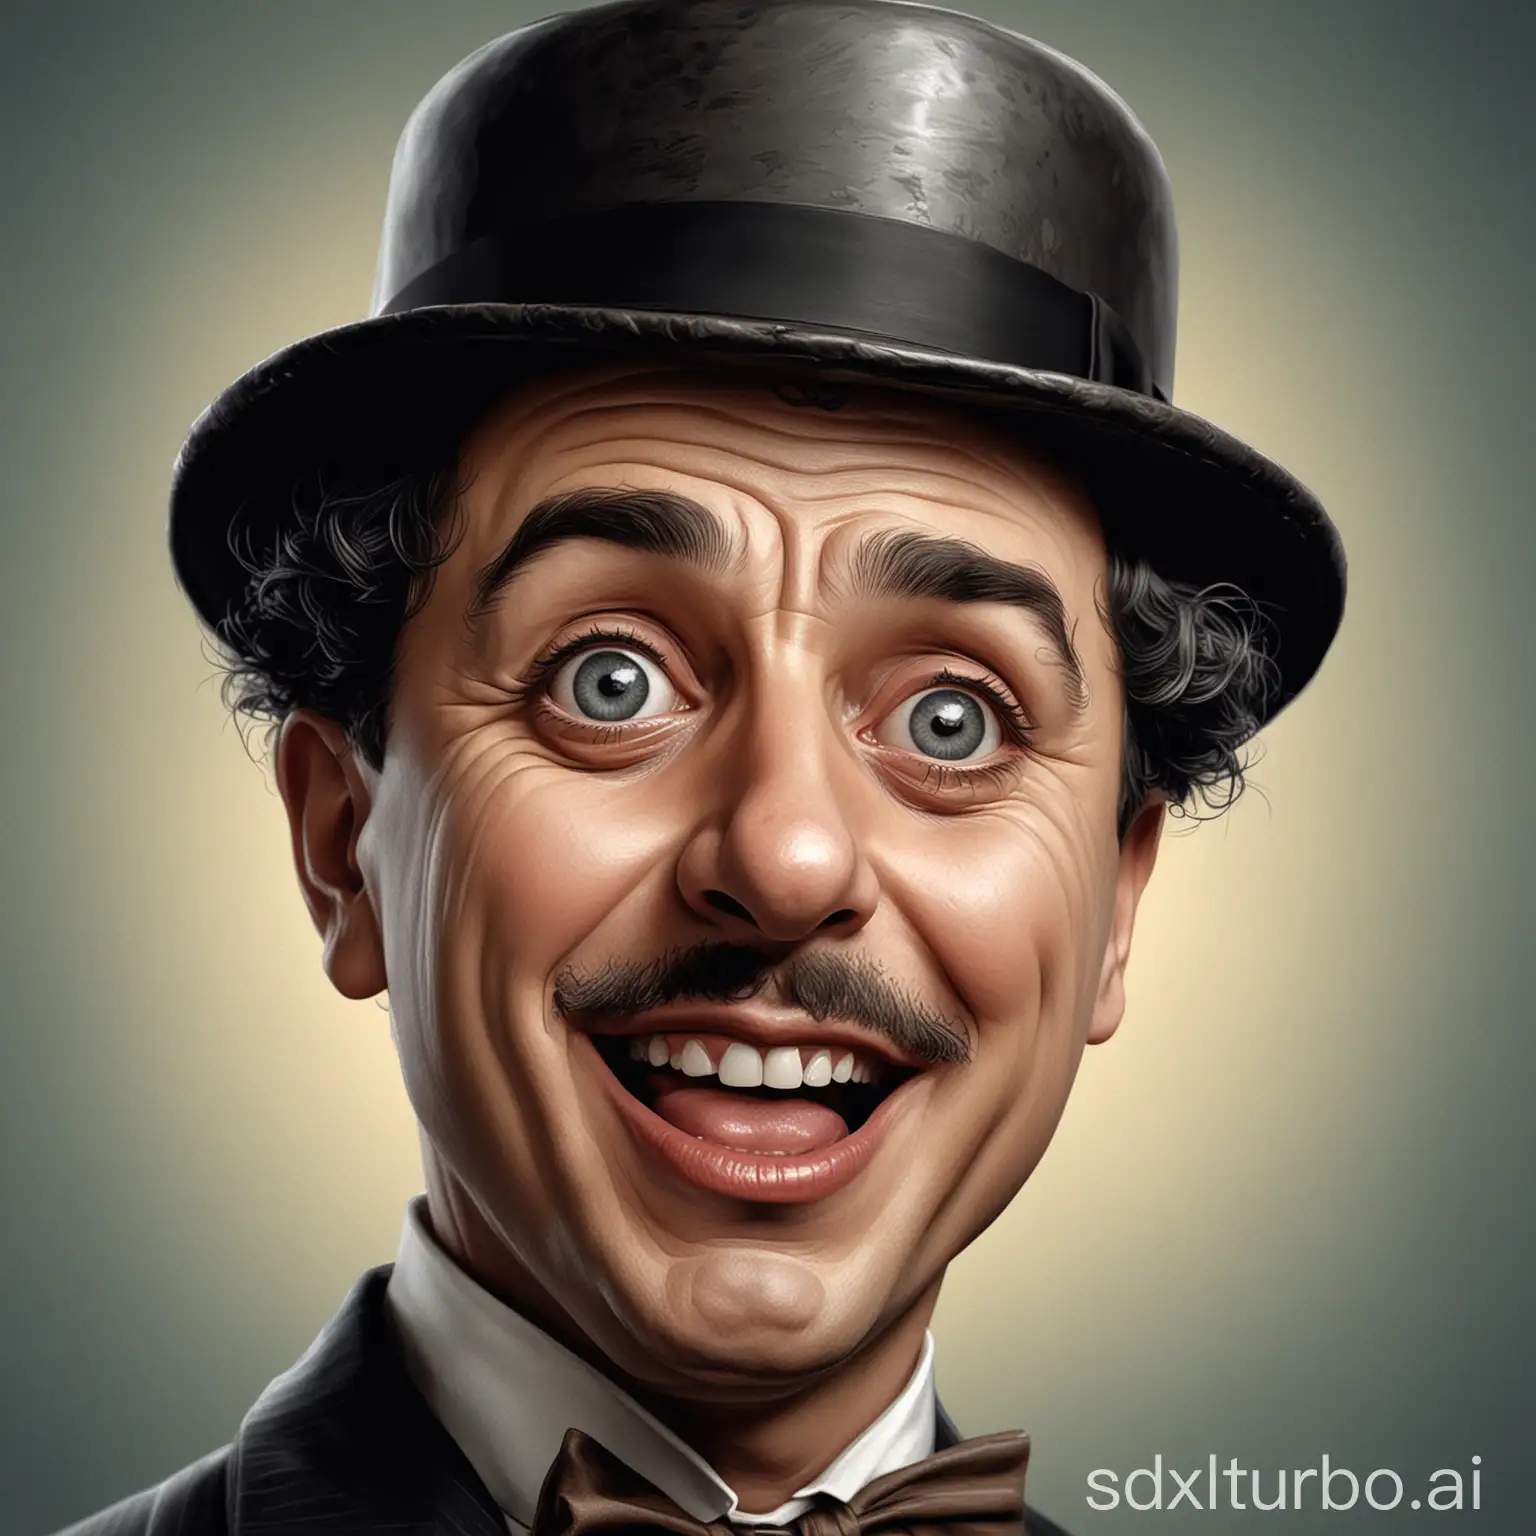 Charles Chaplin, digital art caricature in the style of pop surrealism, vector illustration, high resolution, high quality, high detail, hyper realistic, hyper detailed, ultra realism, high dynamic range, high contrast, high color film grain, he's unpleasantly surprised, mouth slightly open